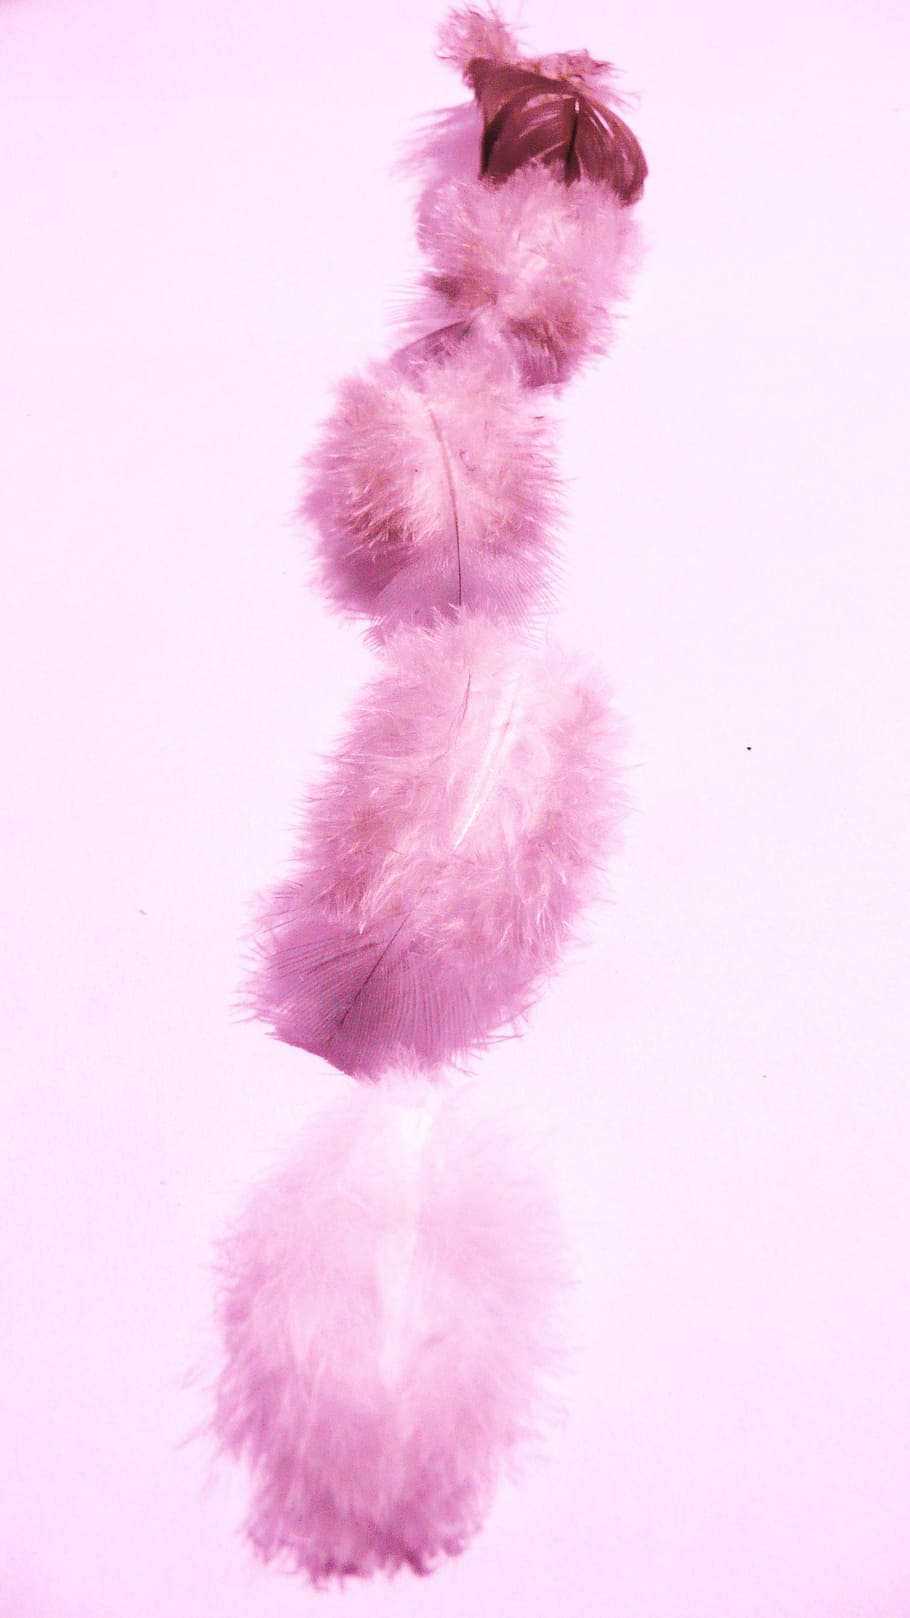 feathers, fluffy, soft, delicate, softness, purple, lavender